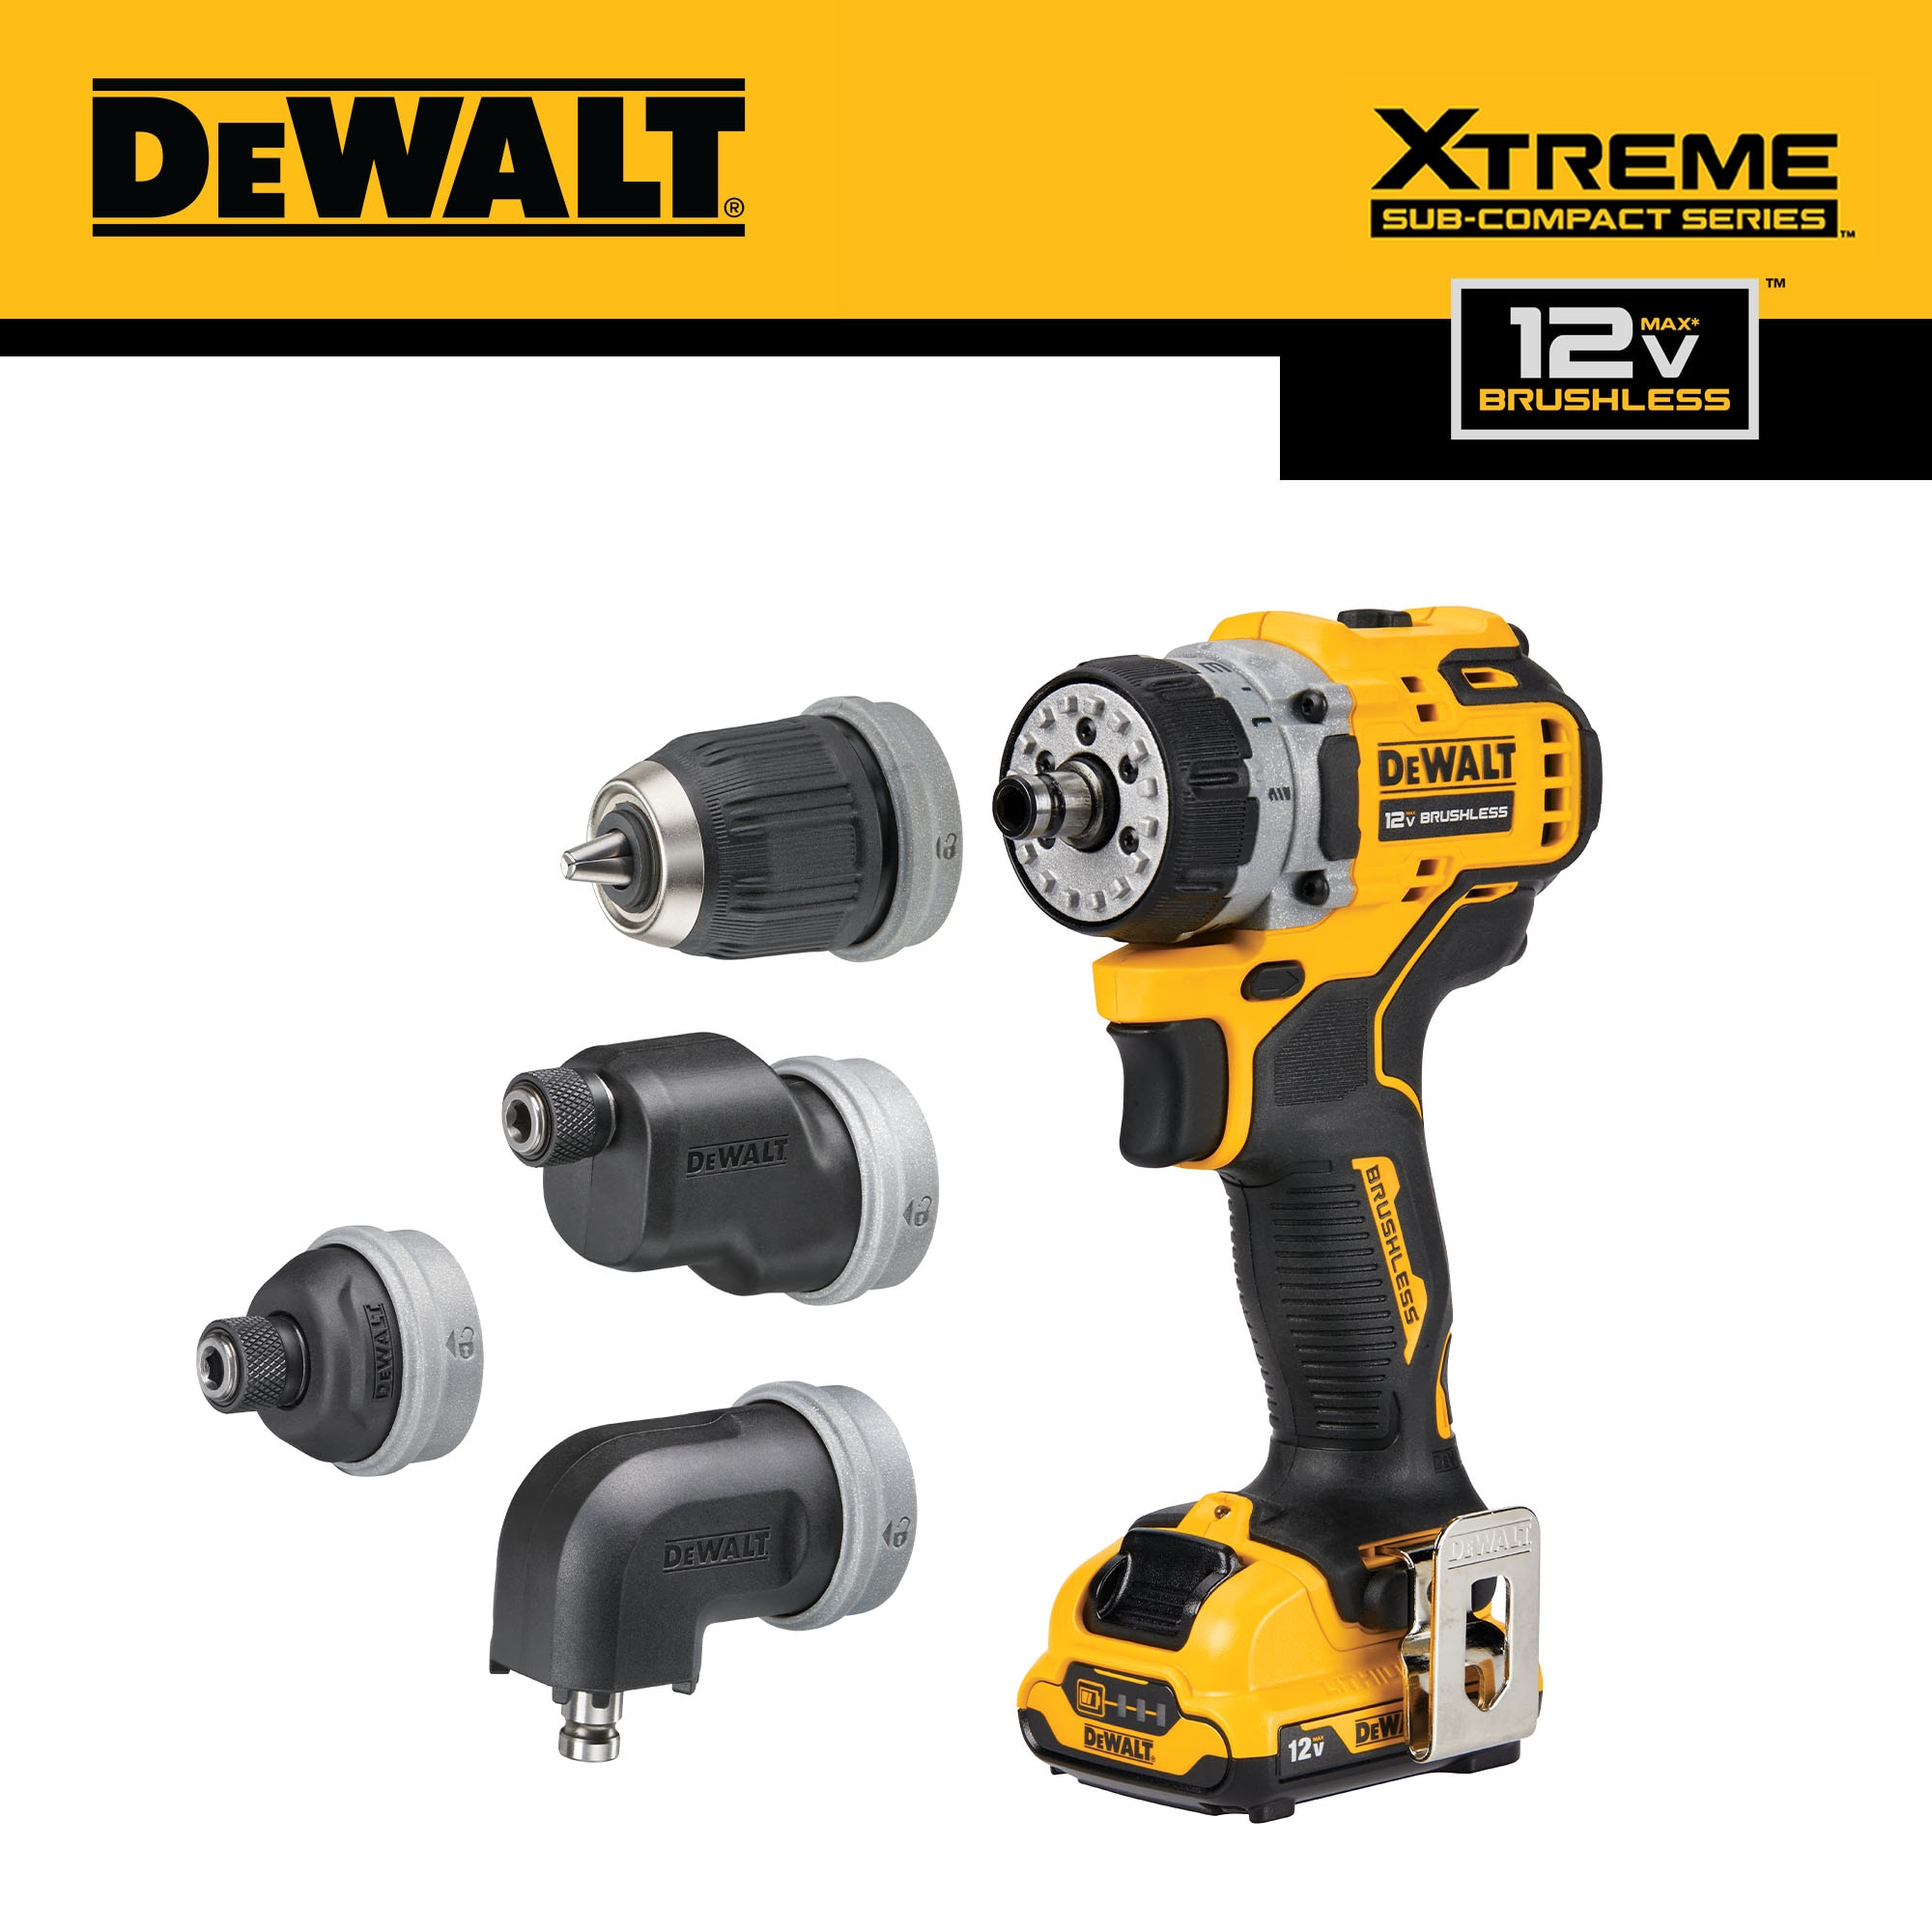 12V Max* Cordless 3/8 In Drill Driver Kit (1) Lithium Ion Battery